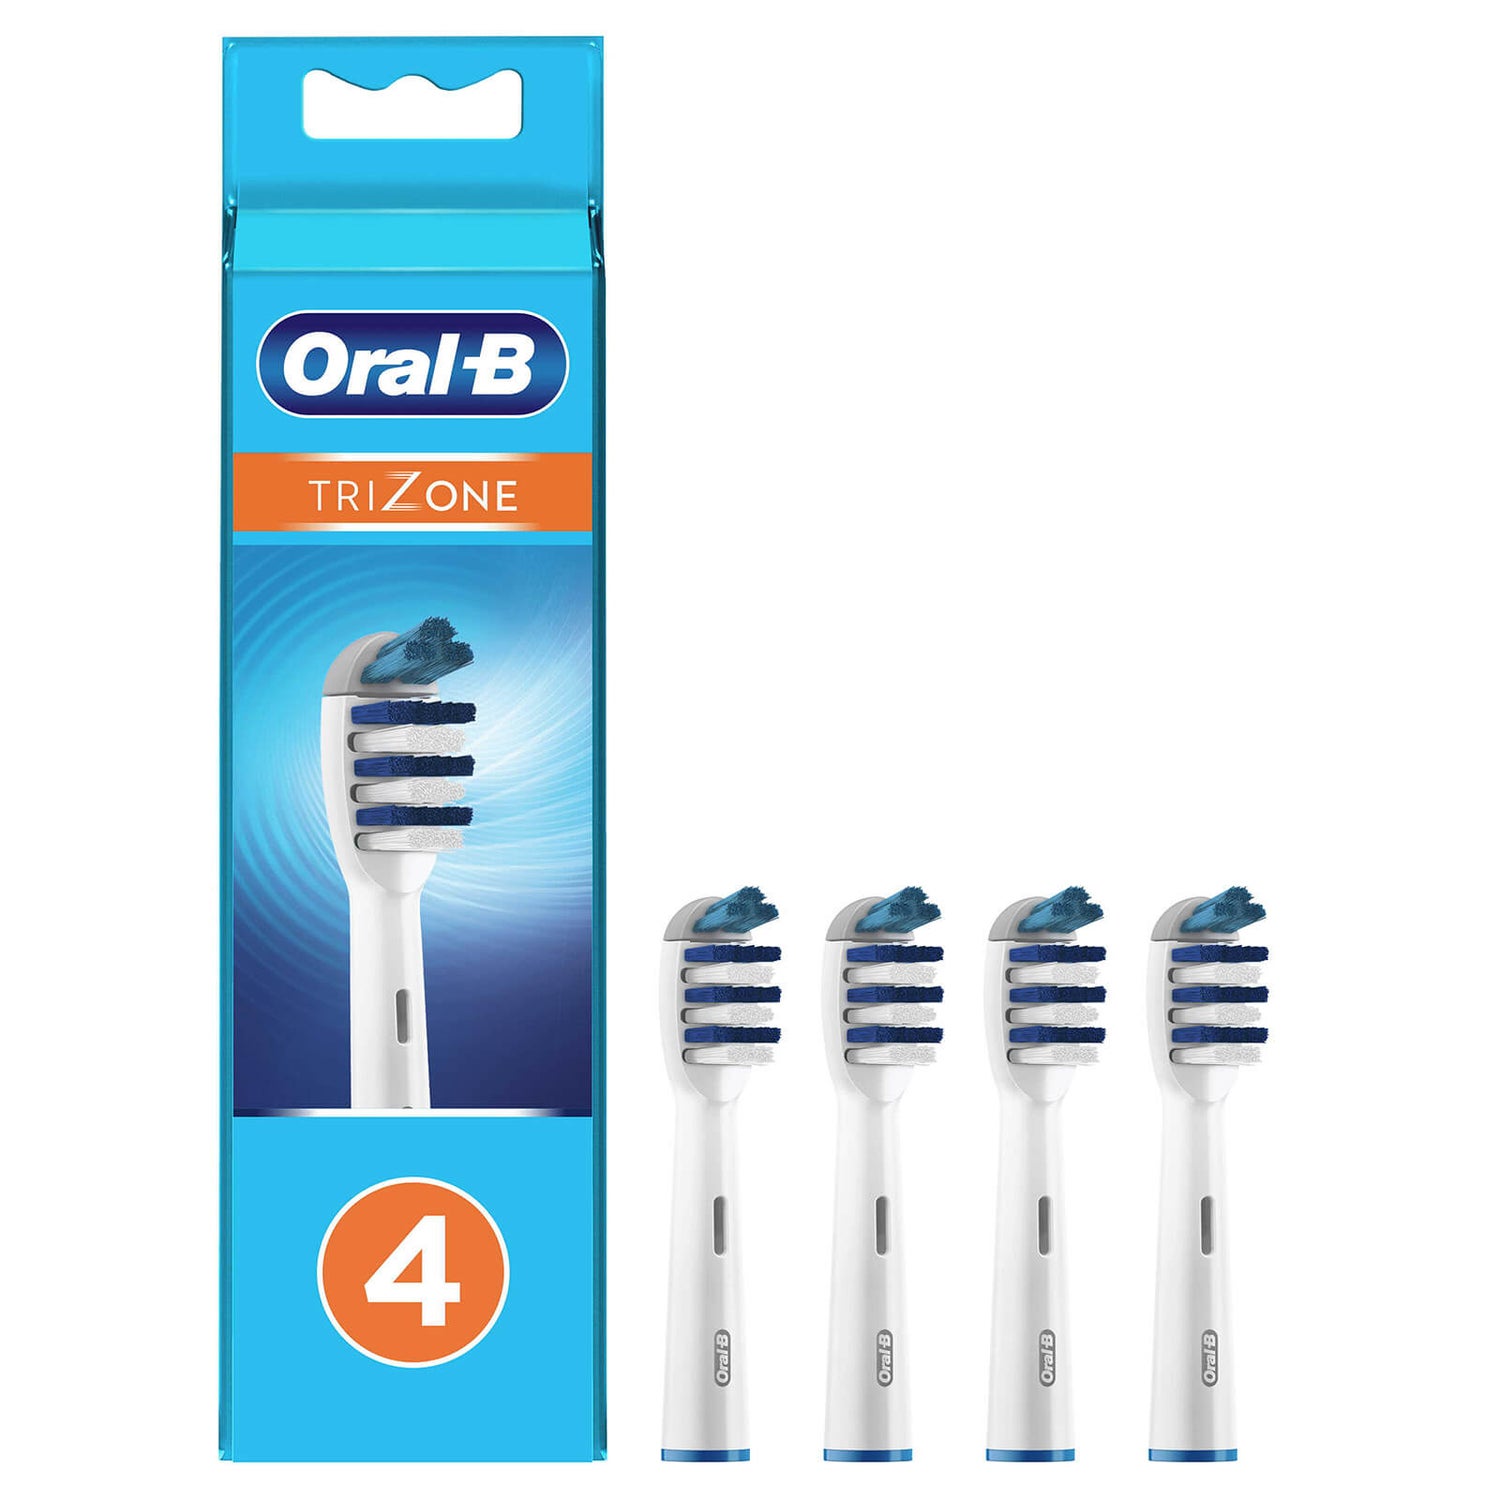 Oral-B Trizone Replacement Toothbrush Head, Pack of 4 Counts